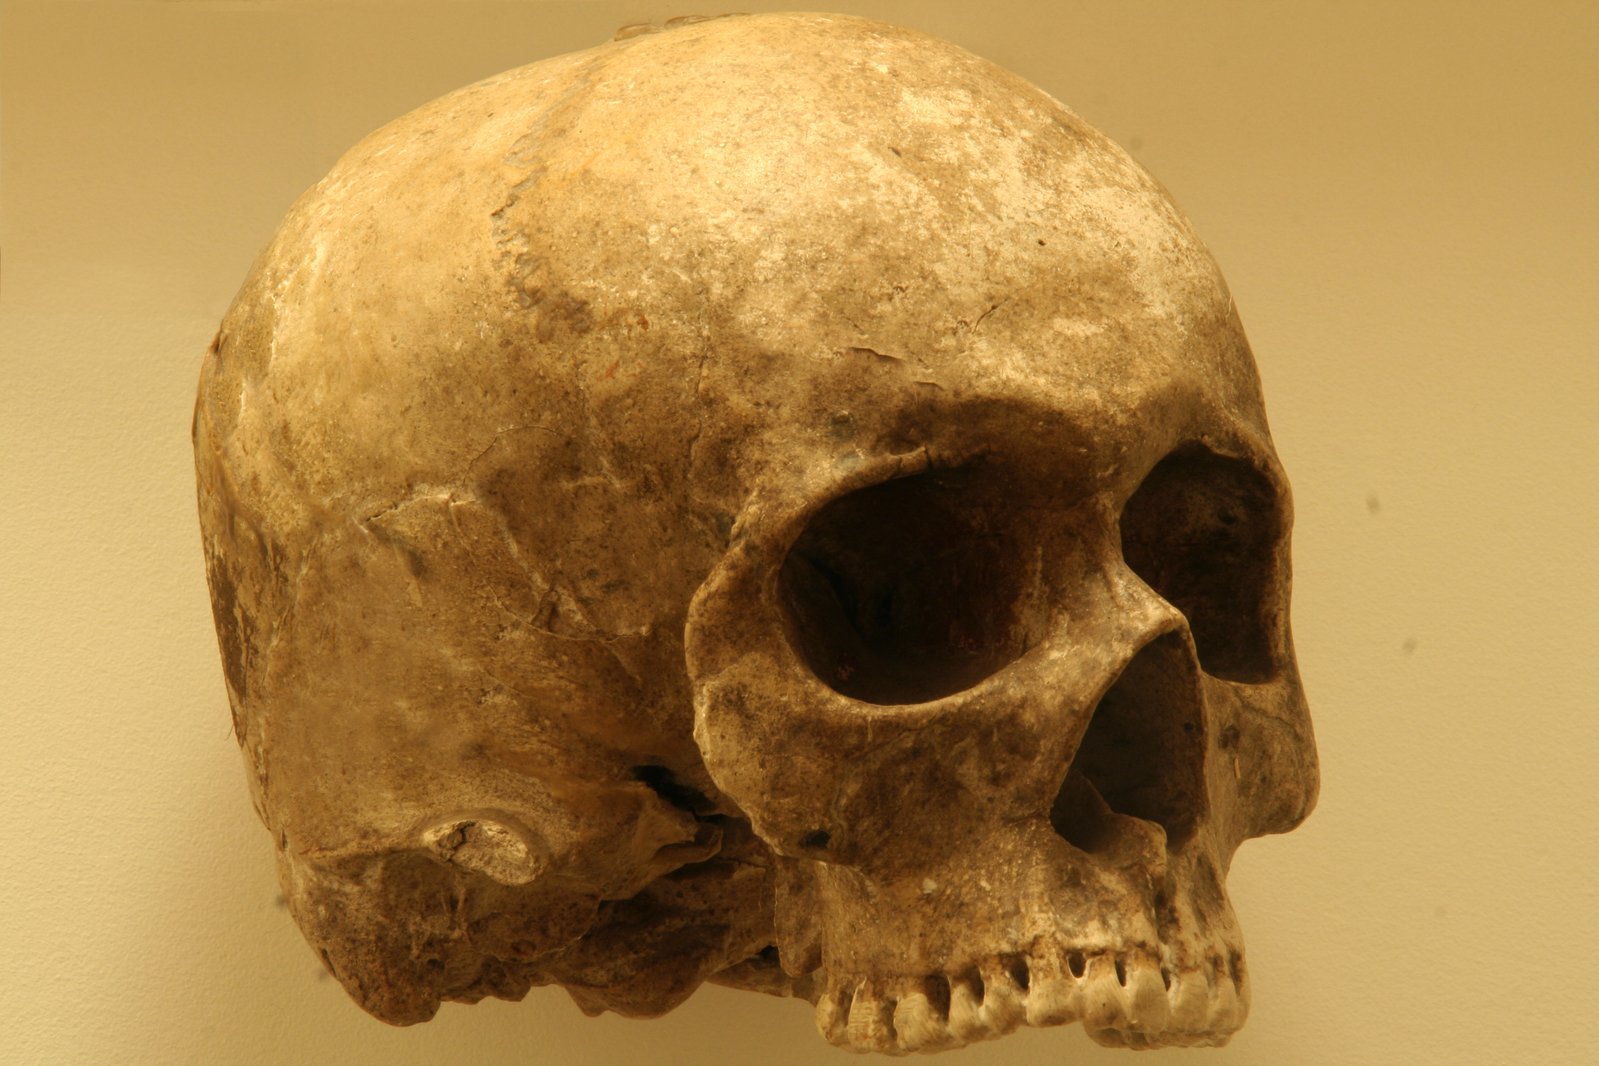 a human skull mounted on display in a museum